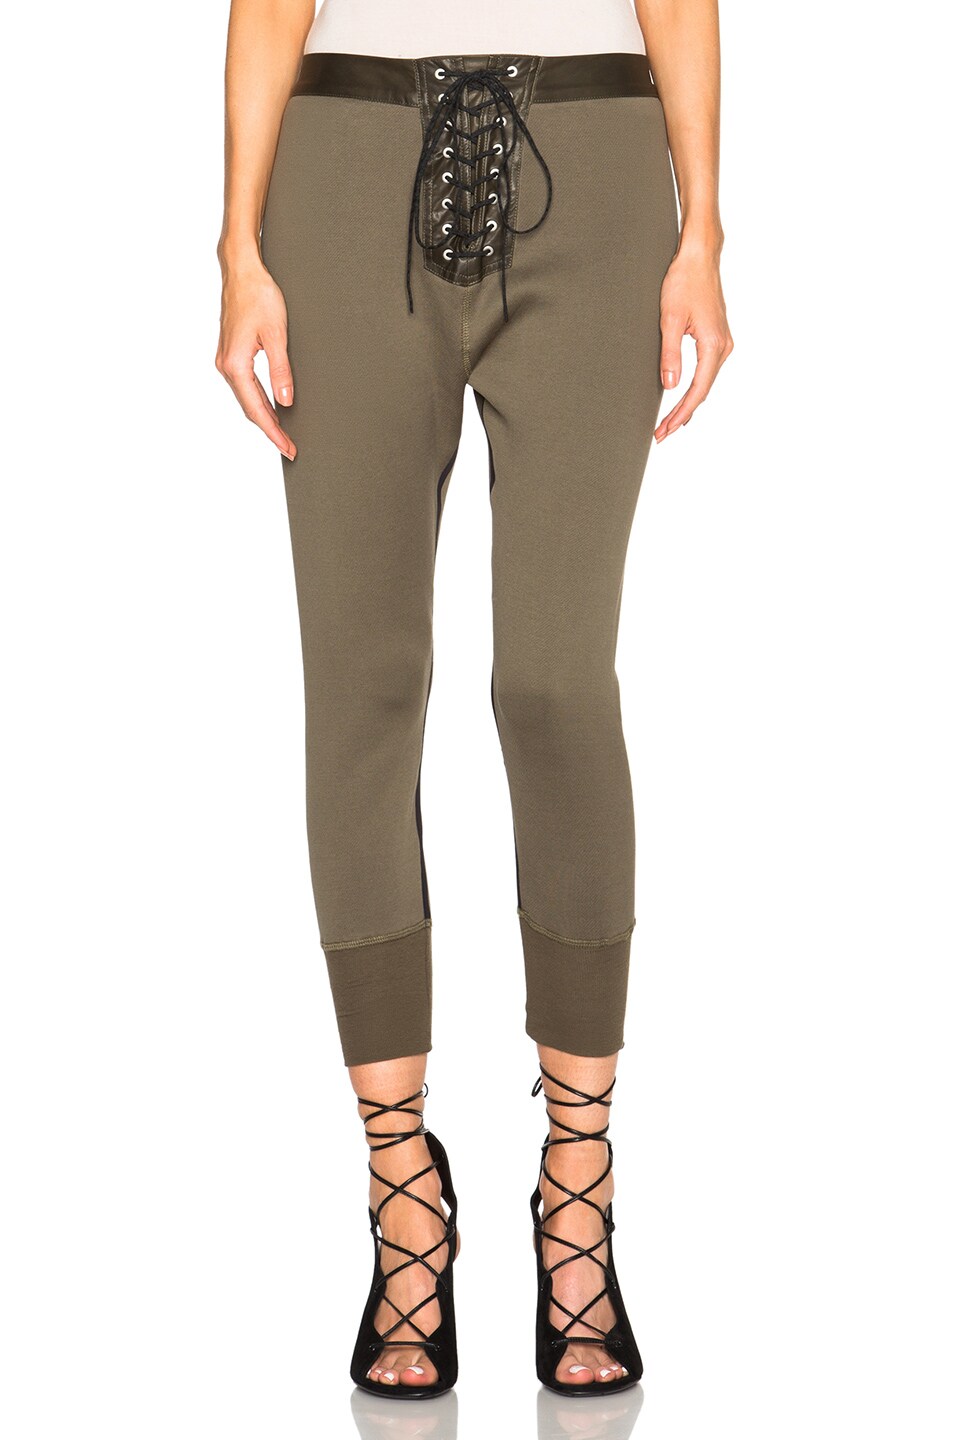 Image 1 of Unravel Lace Up Leggings in Army Green Sunfade